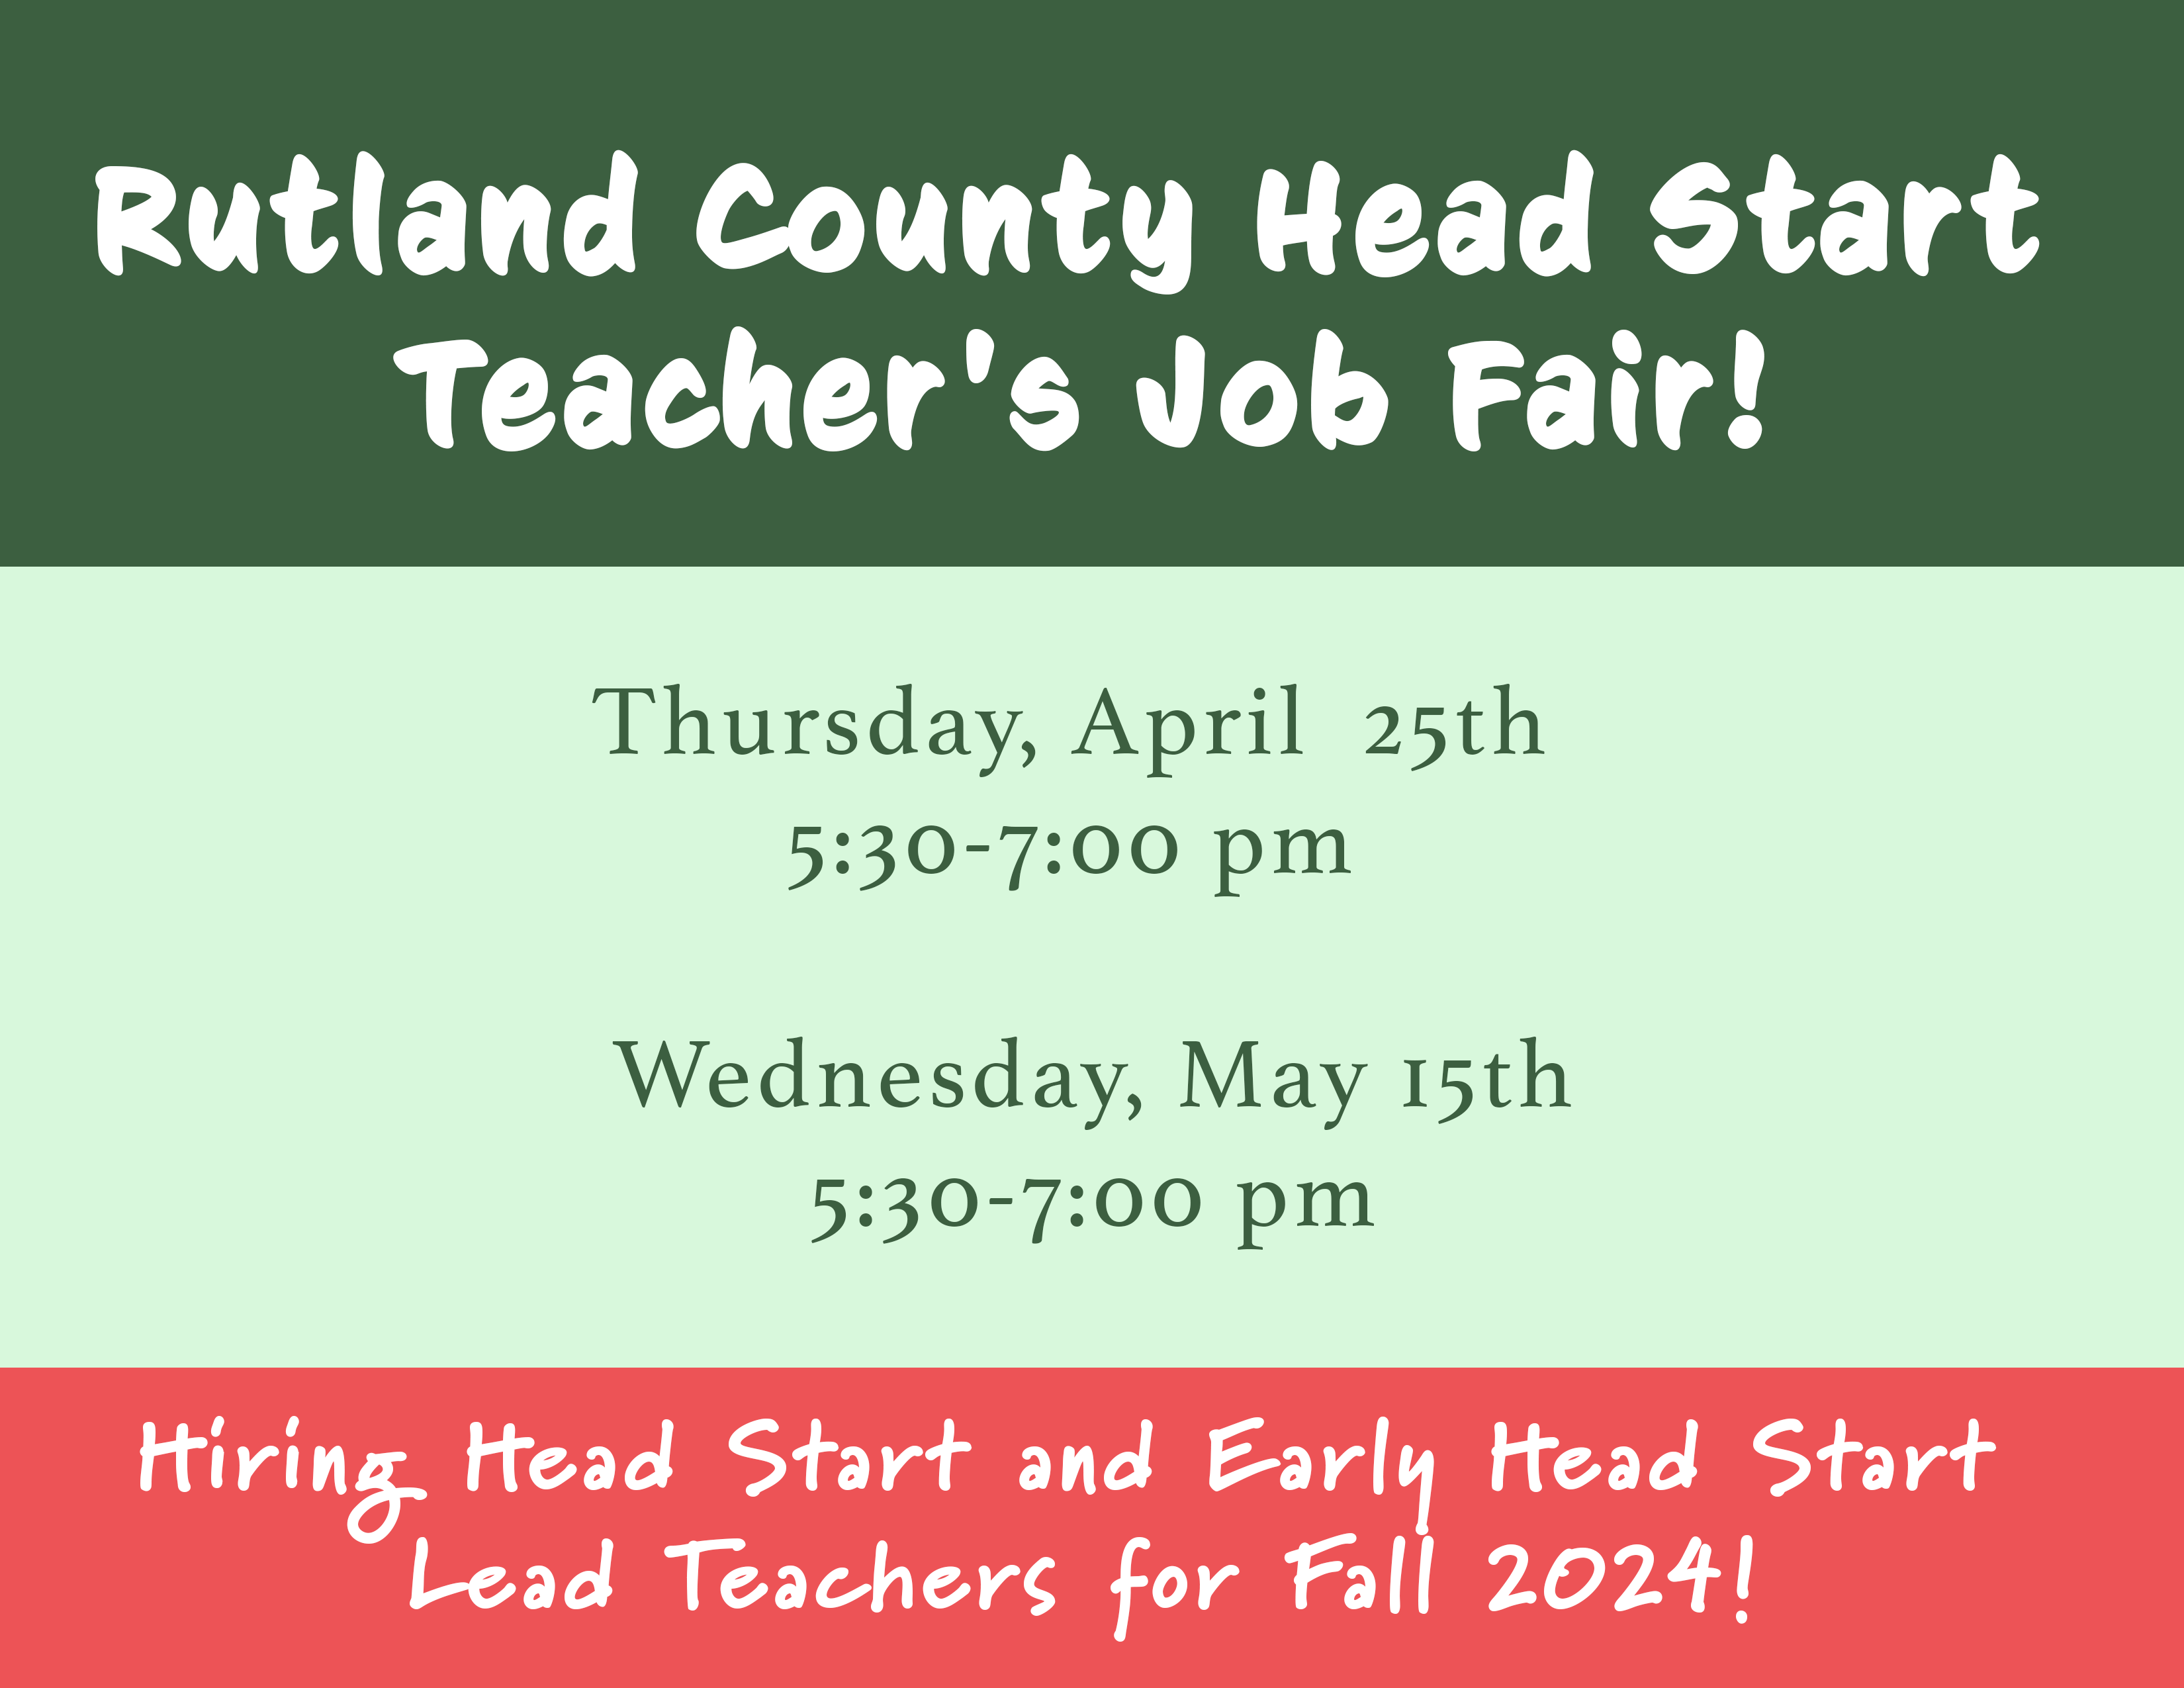 Now Hiring Head Start and Early Head Start Lead Teachers for Fall 2024!

Are you interested in finding out more about working as a Head Start Teacher?

We are now recruiting for Fall teacher positions: 

Lead Teacher and Teacher in Training

We will be having a Job Fair/ Open House on:

Thursday, April  25th from 5:30-7:00 pm 

Wednesday, May 15th from 5:30-7:00 pm

We will be having a short presentation on Head Start, Early Head Start including a Q&A panel from current teachers and managers.